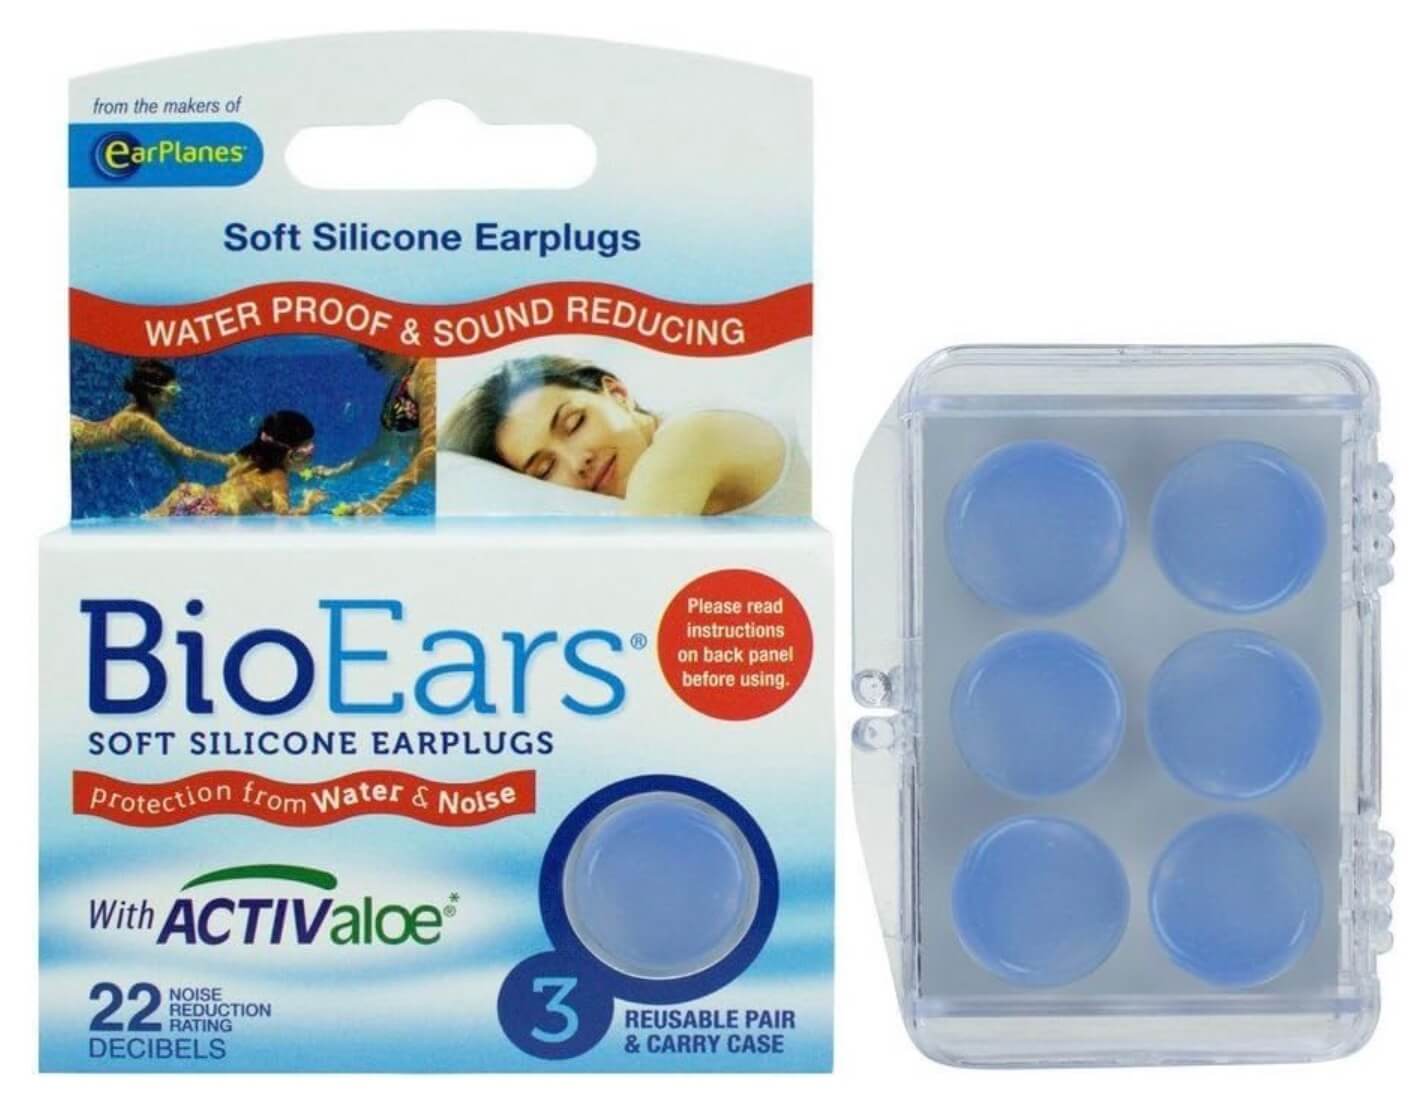 festival ear plugs are good for a yoga retreat packing list